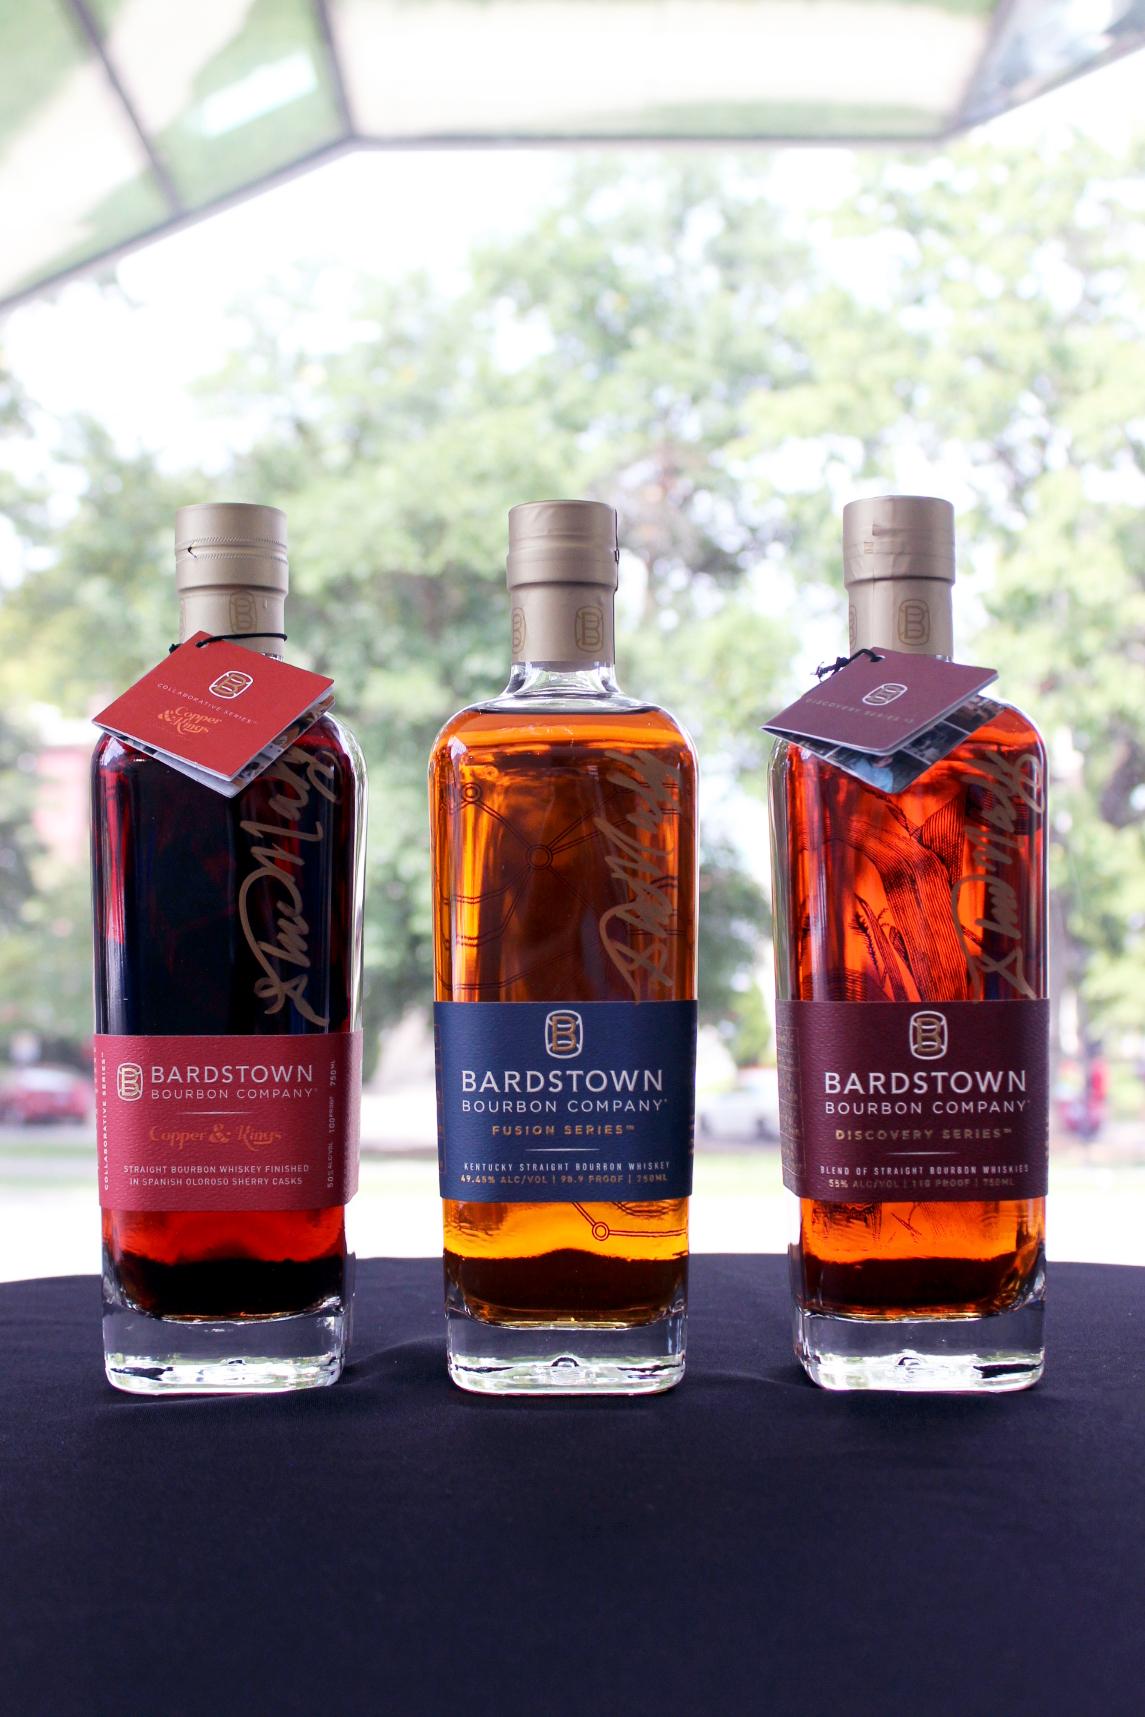 Bardstown Bourbon Co. signed bottles & experience